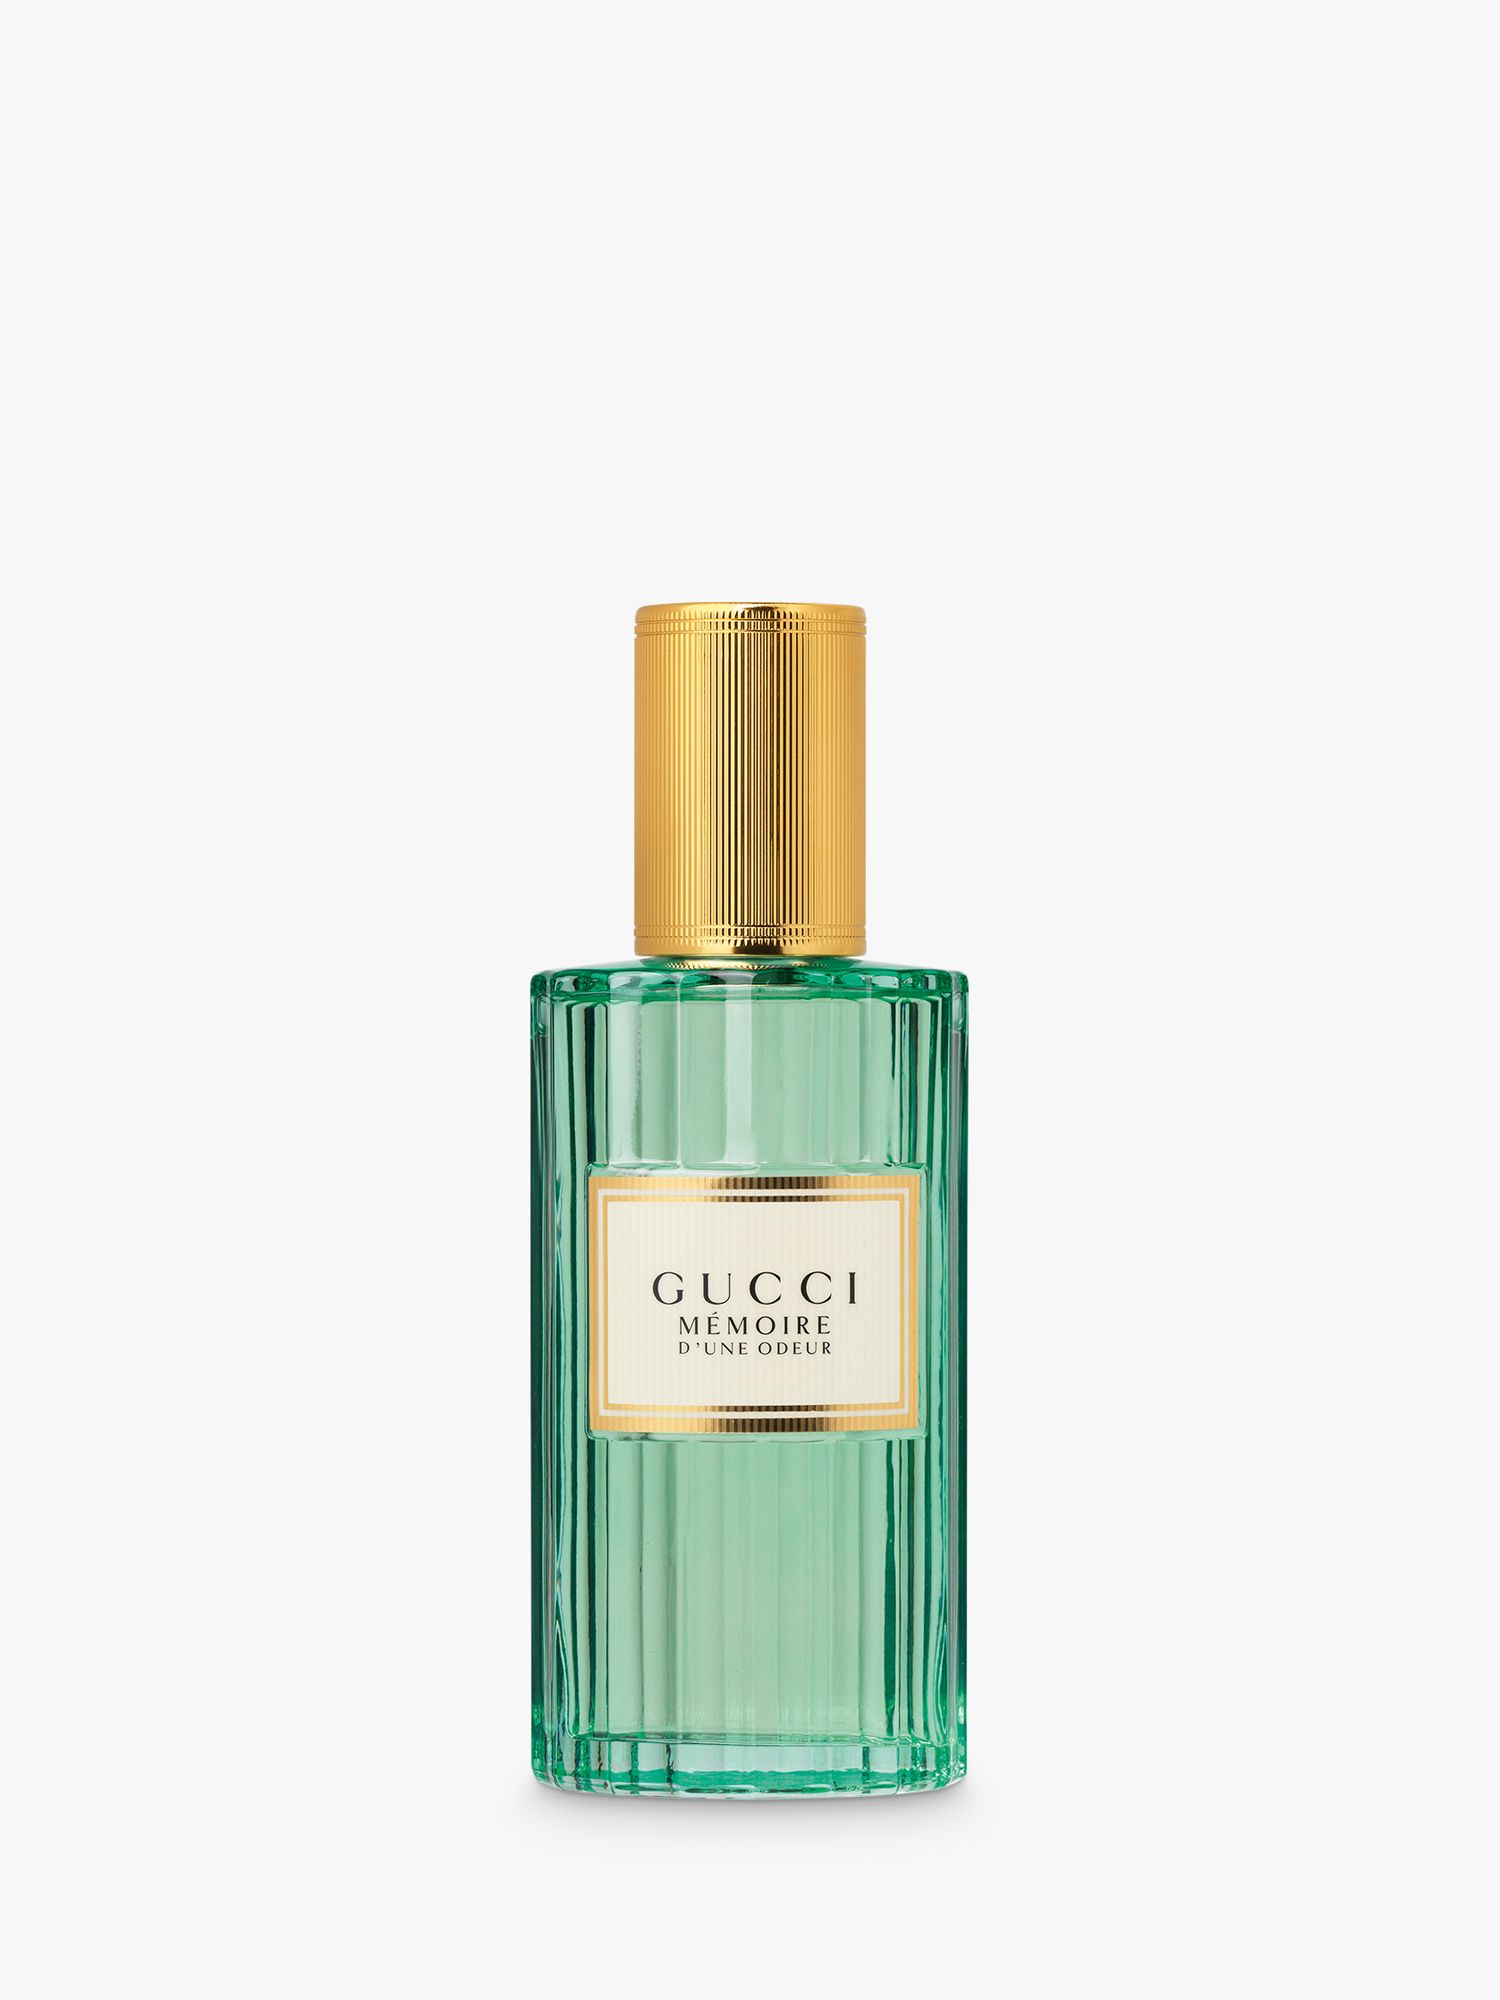 gucci guilty body lotion boots